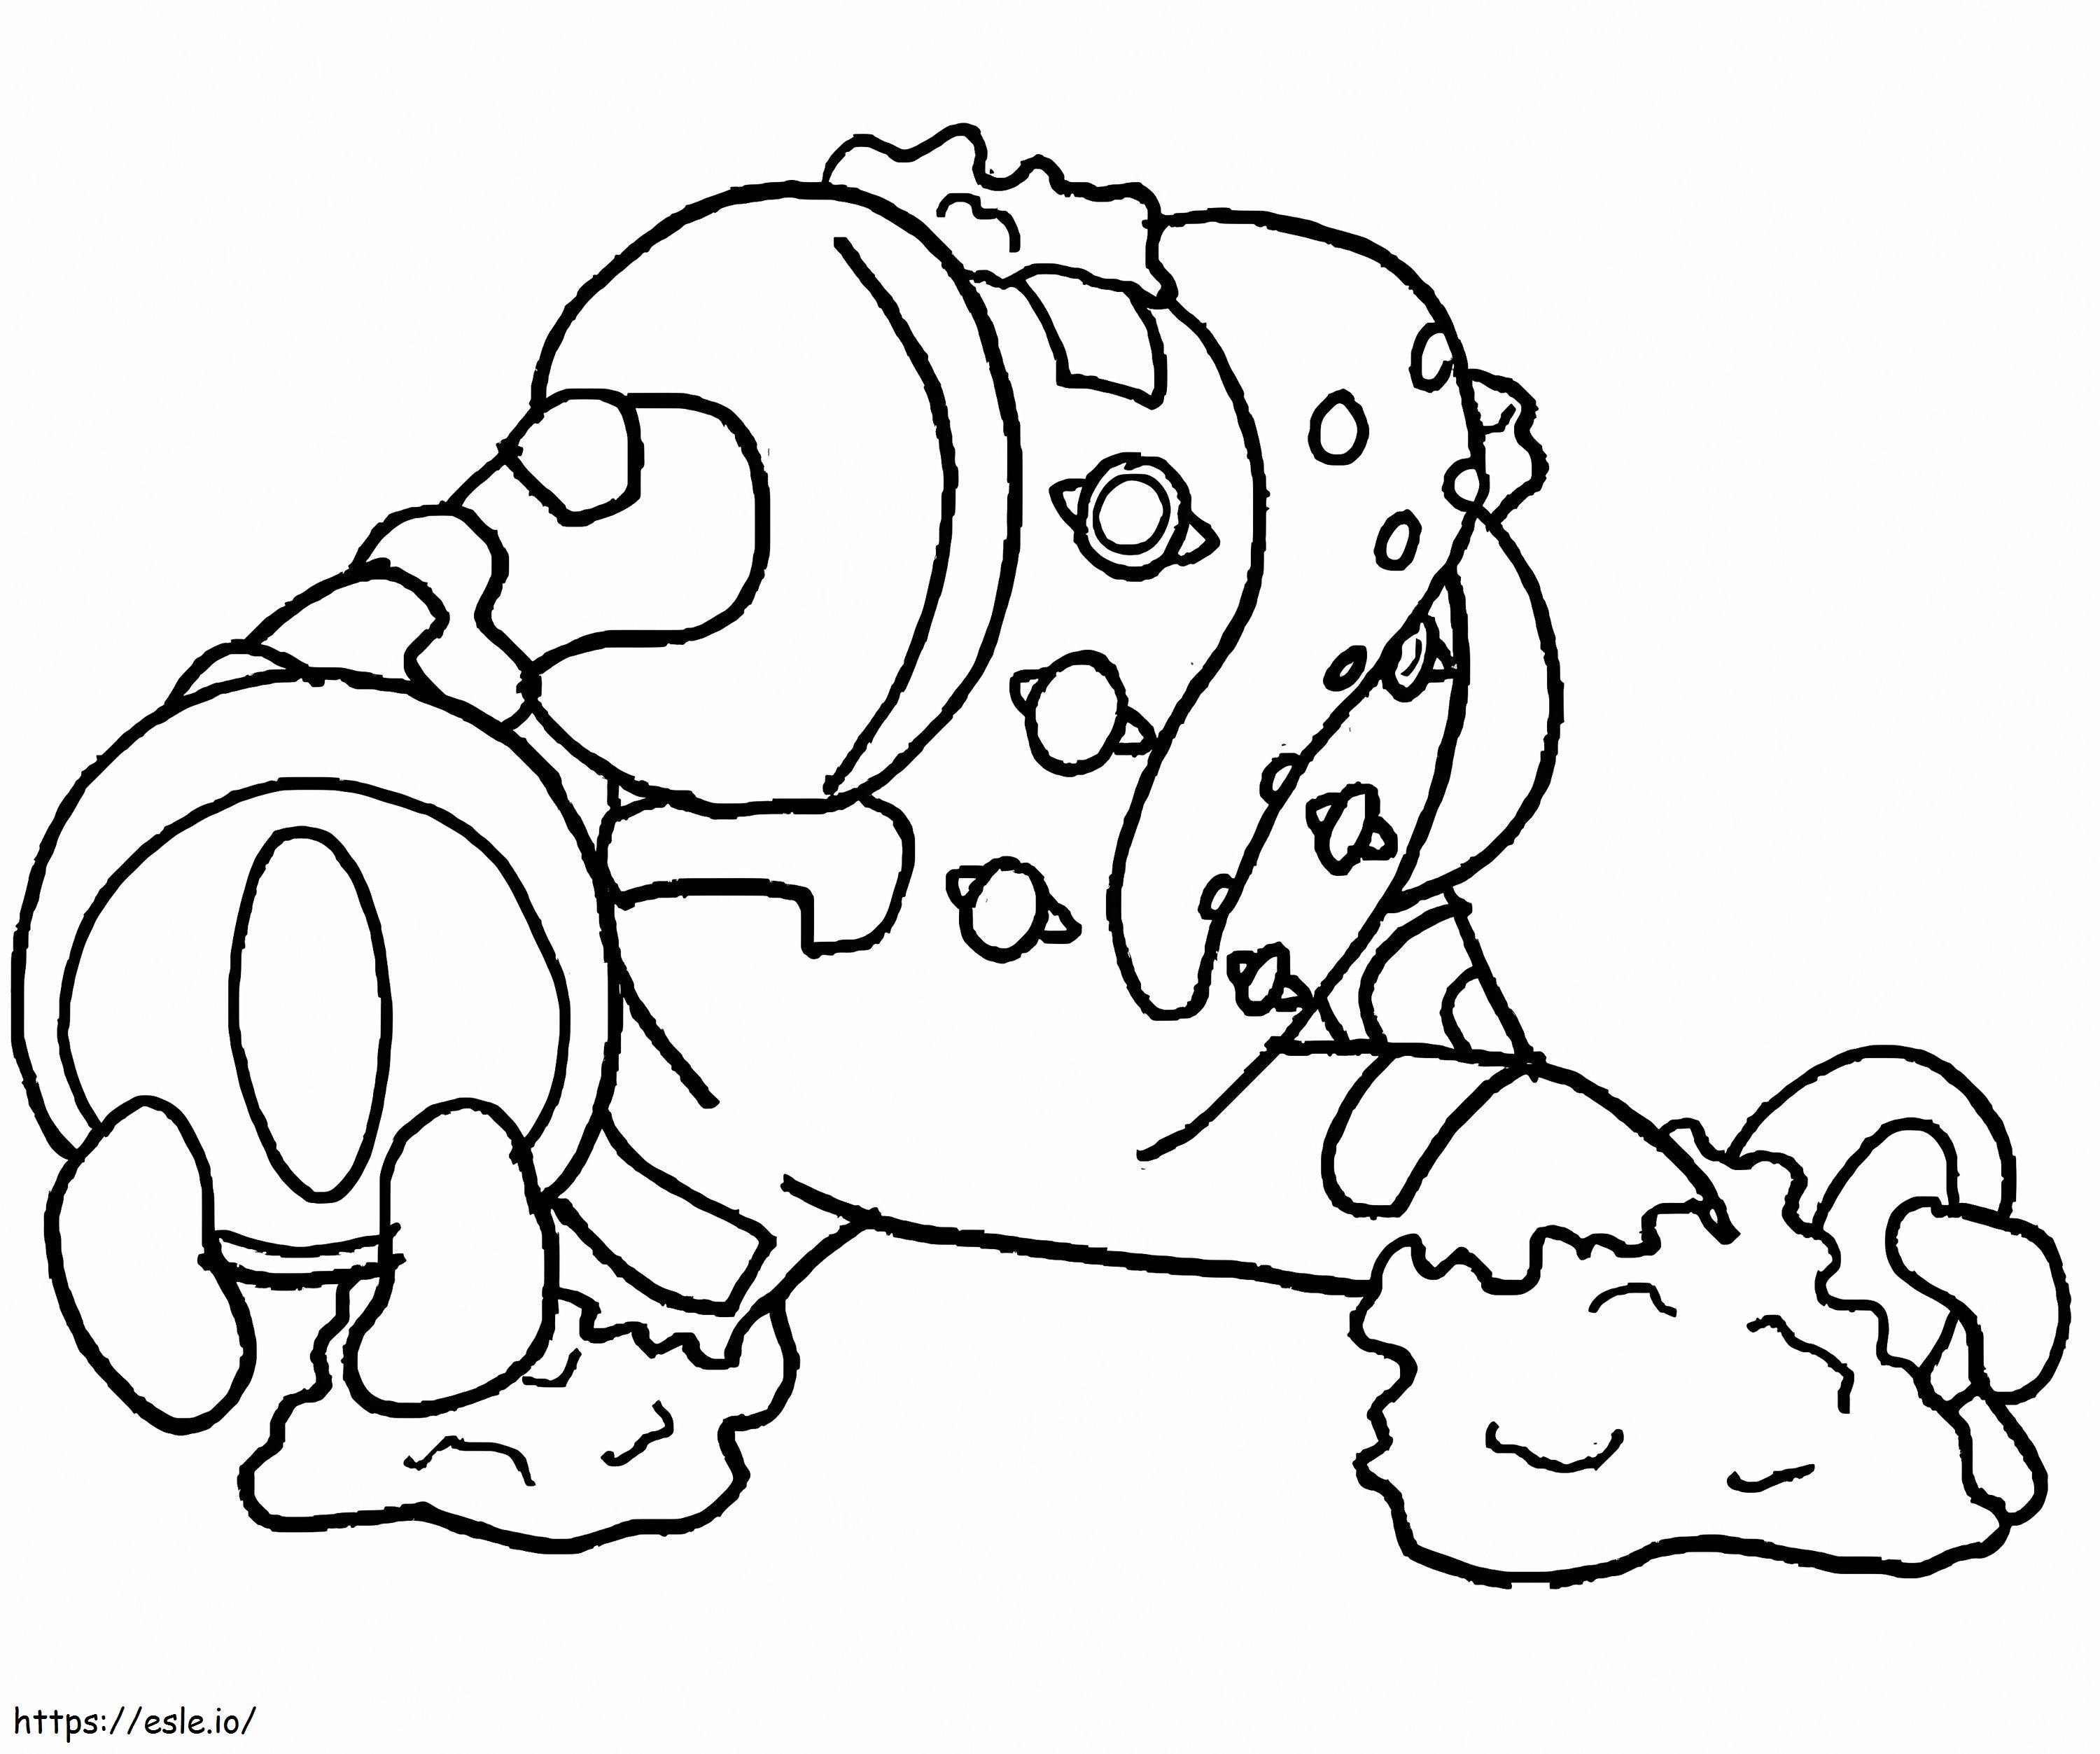 Controls 1 coloring page